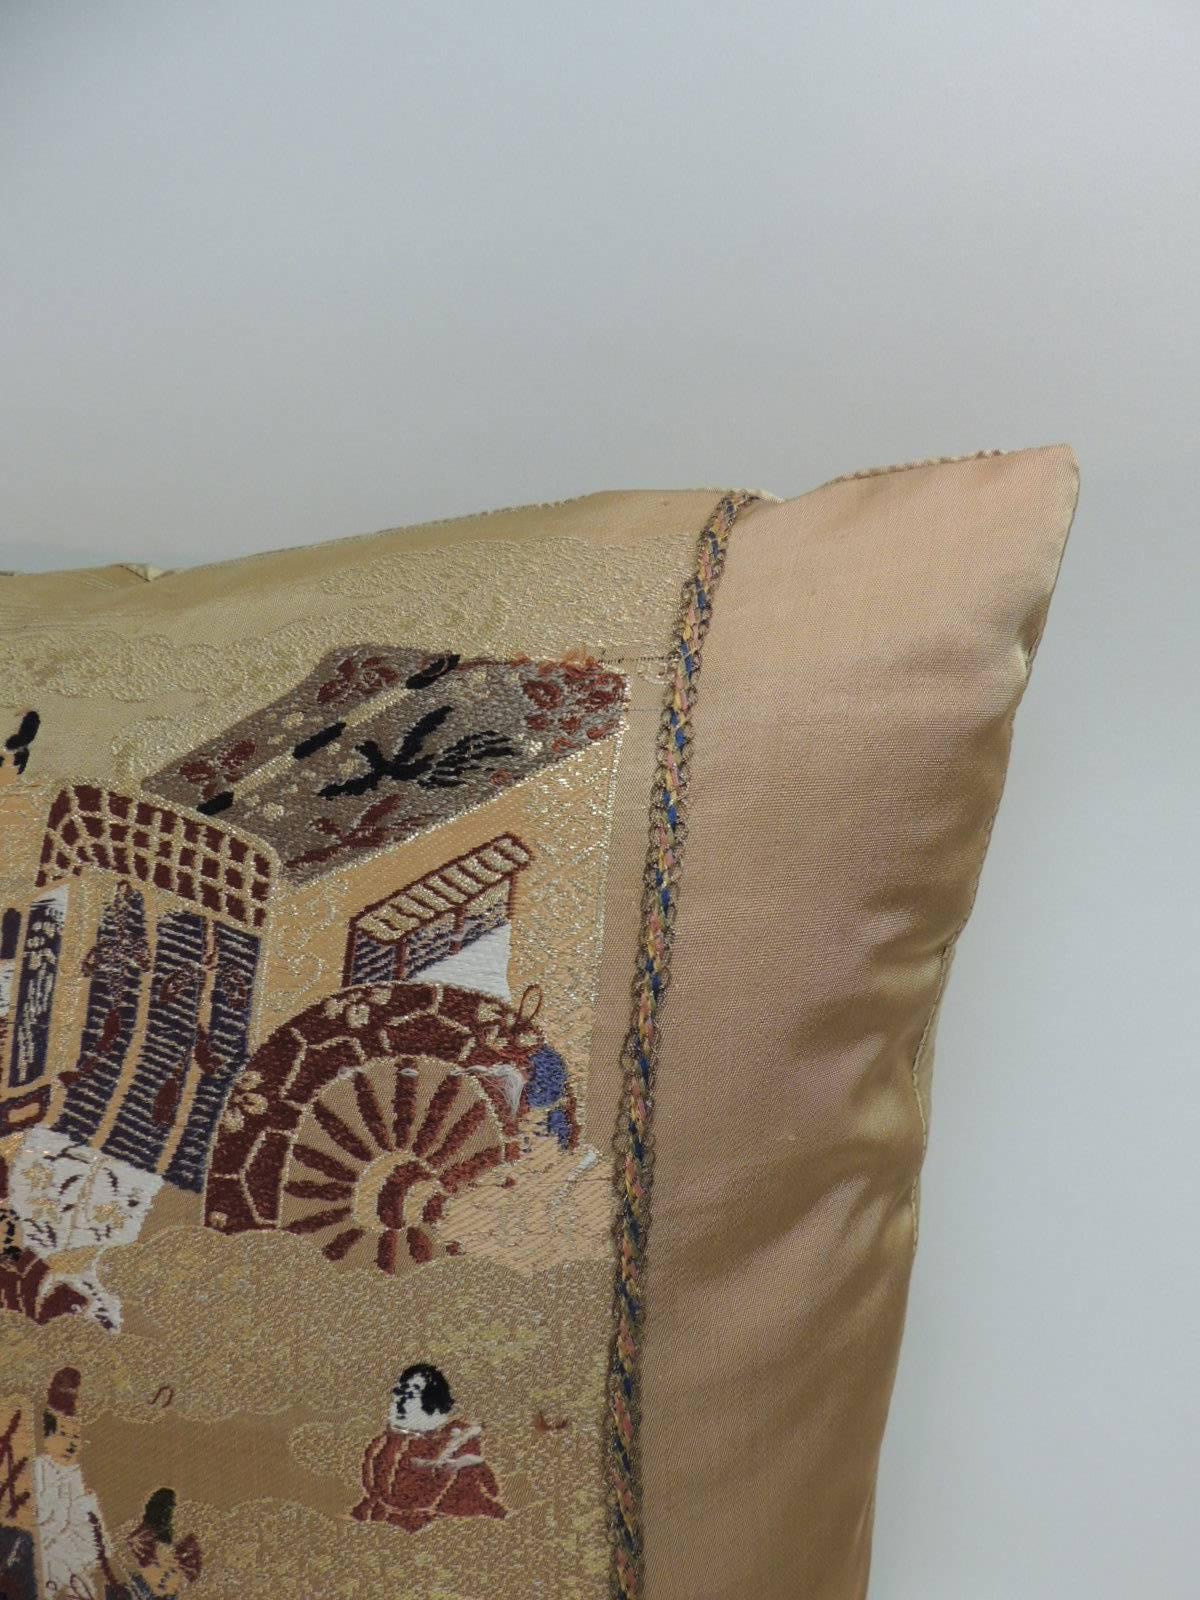 Woven Obi front panel centre depicting a pastoral scene with silk and metallic threads embroidered onto a silk backing and framed with the same Obi textile in gold. Decorative pillows embellished with a small woven trim with metallic threads in